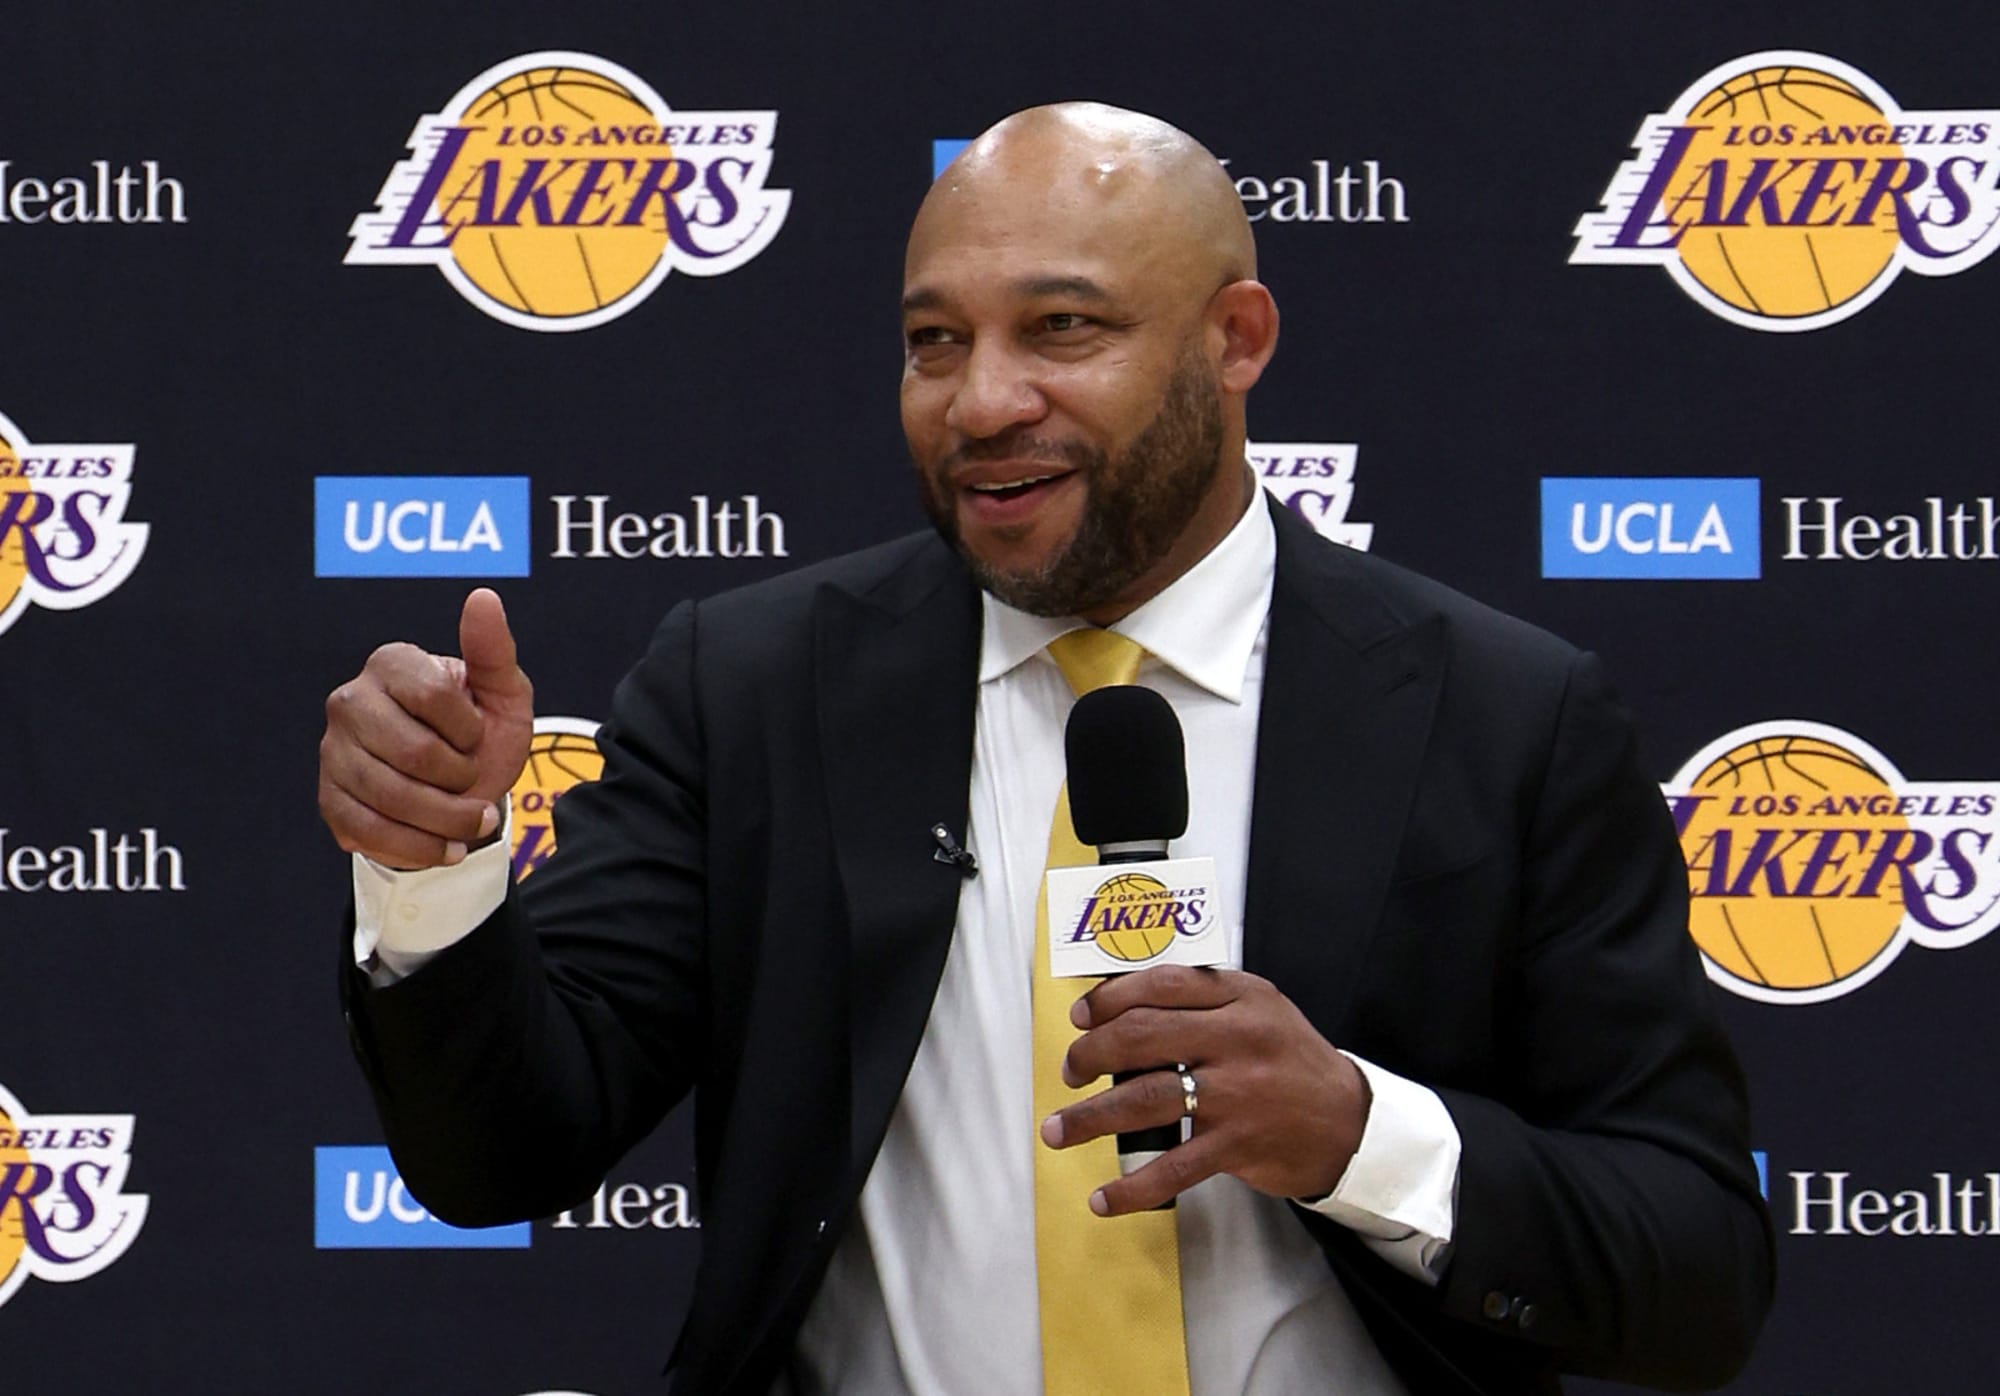 The 2021 Lakers are the proof of bad FO management, having the worst roster  in the league